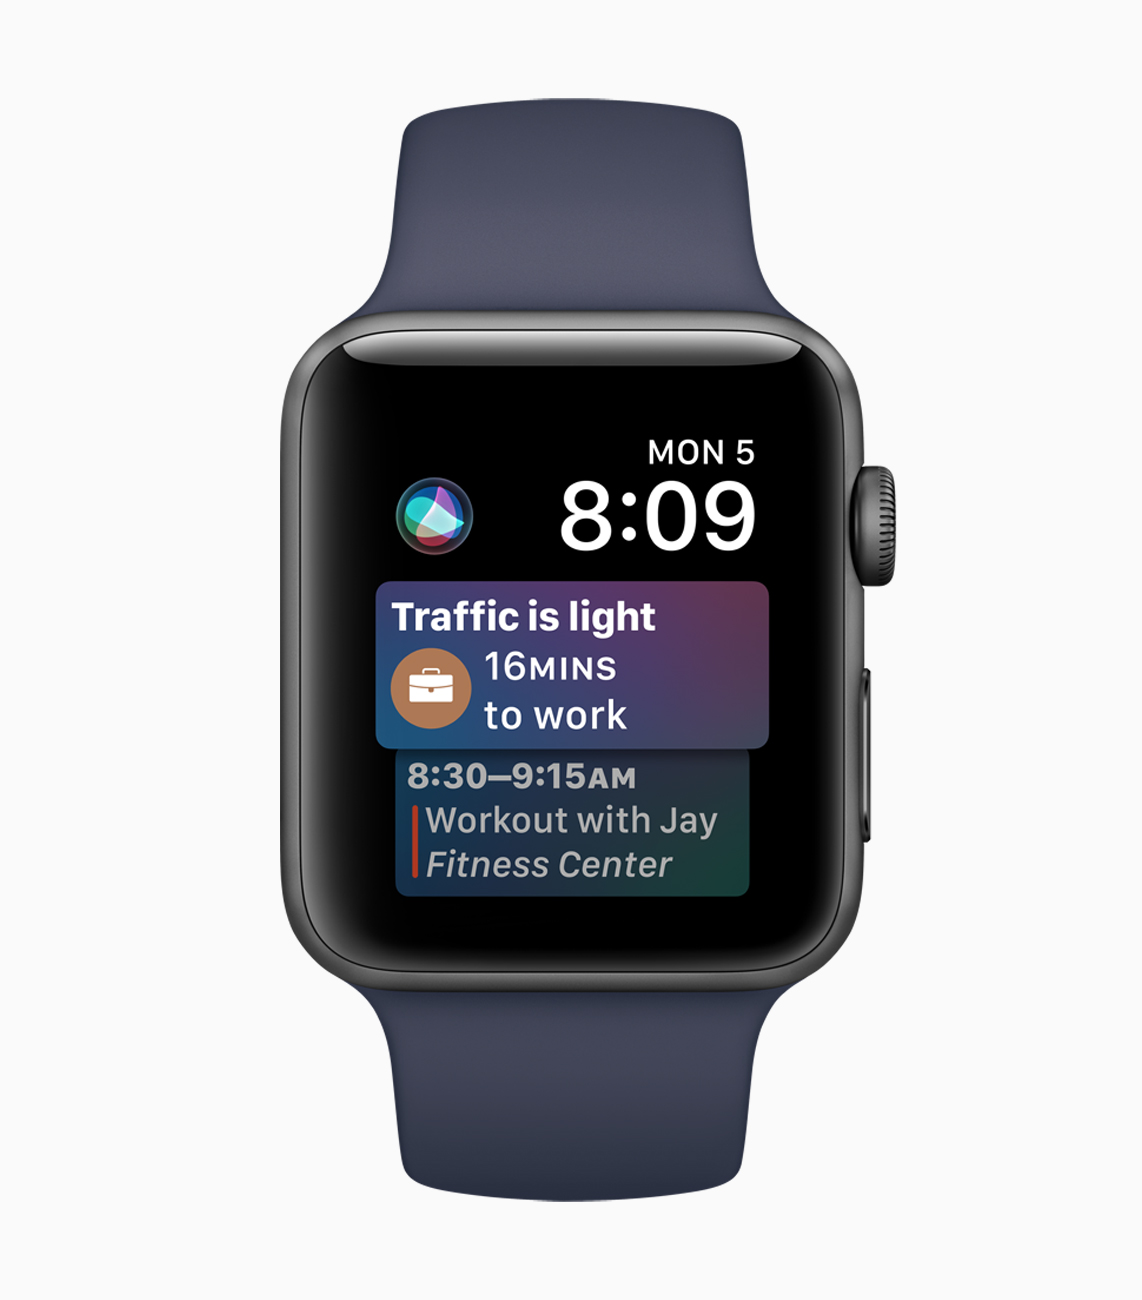 Apple Debuts watchOS 4 With Proactive Siri Watch Face, Activity Coaching, New Music Experience, More